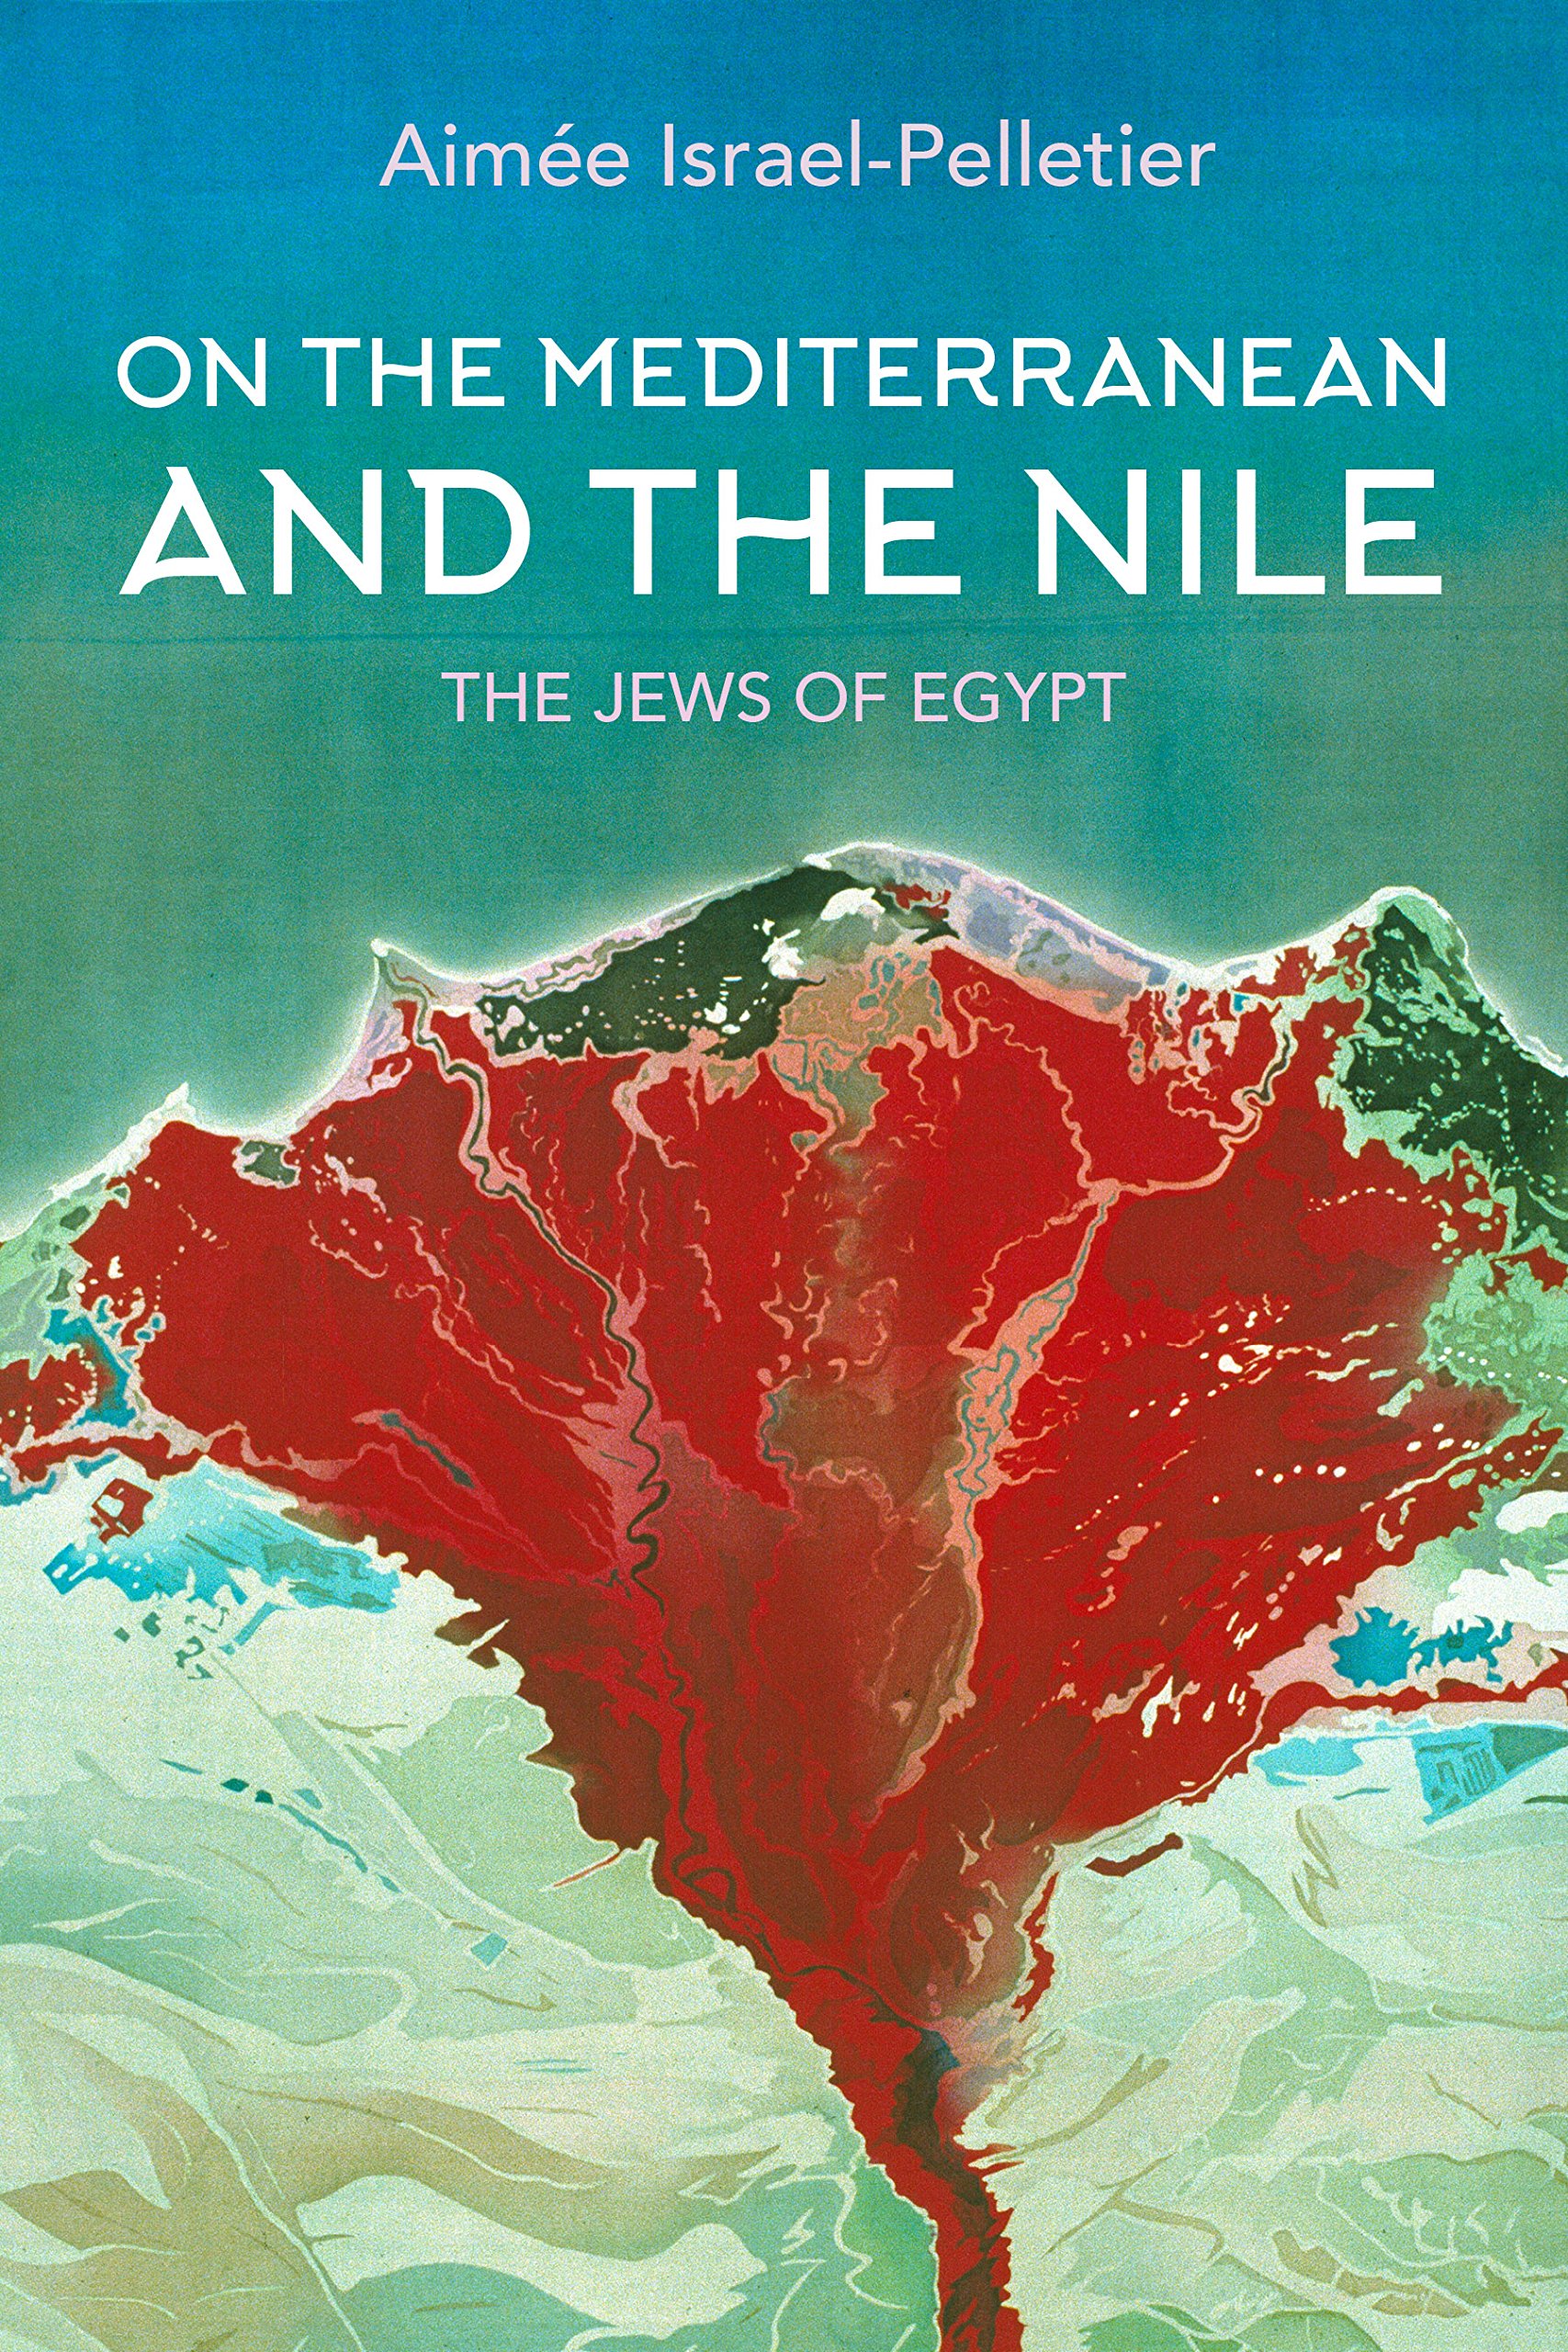 On the Mediterranean and the Nile: the Jews of Egypt